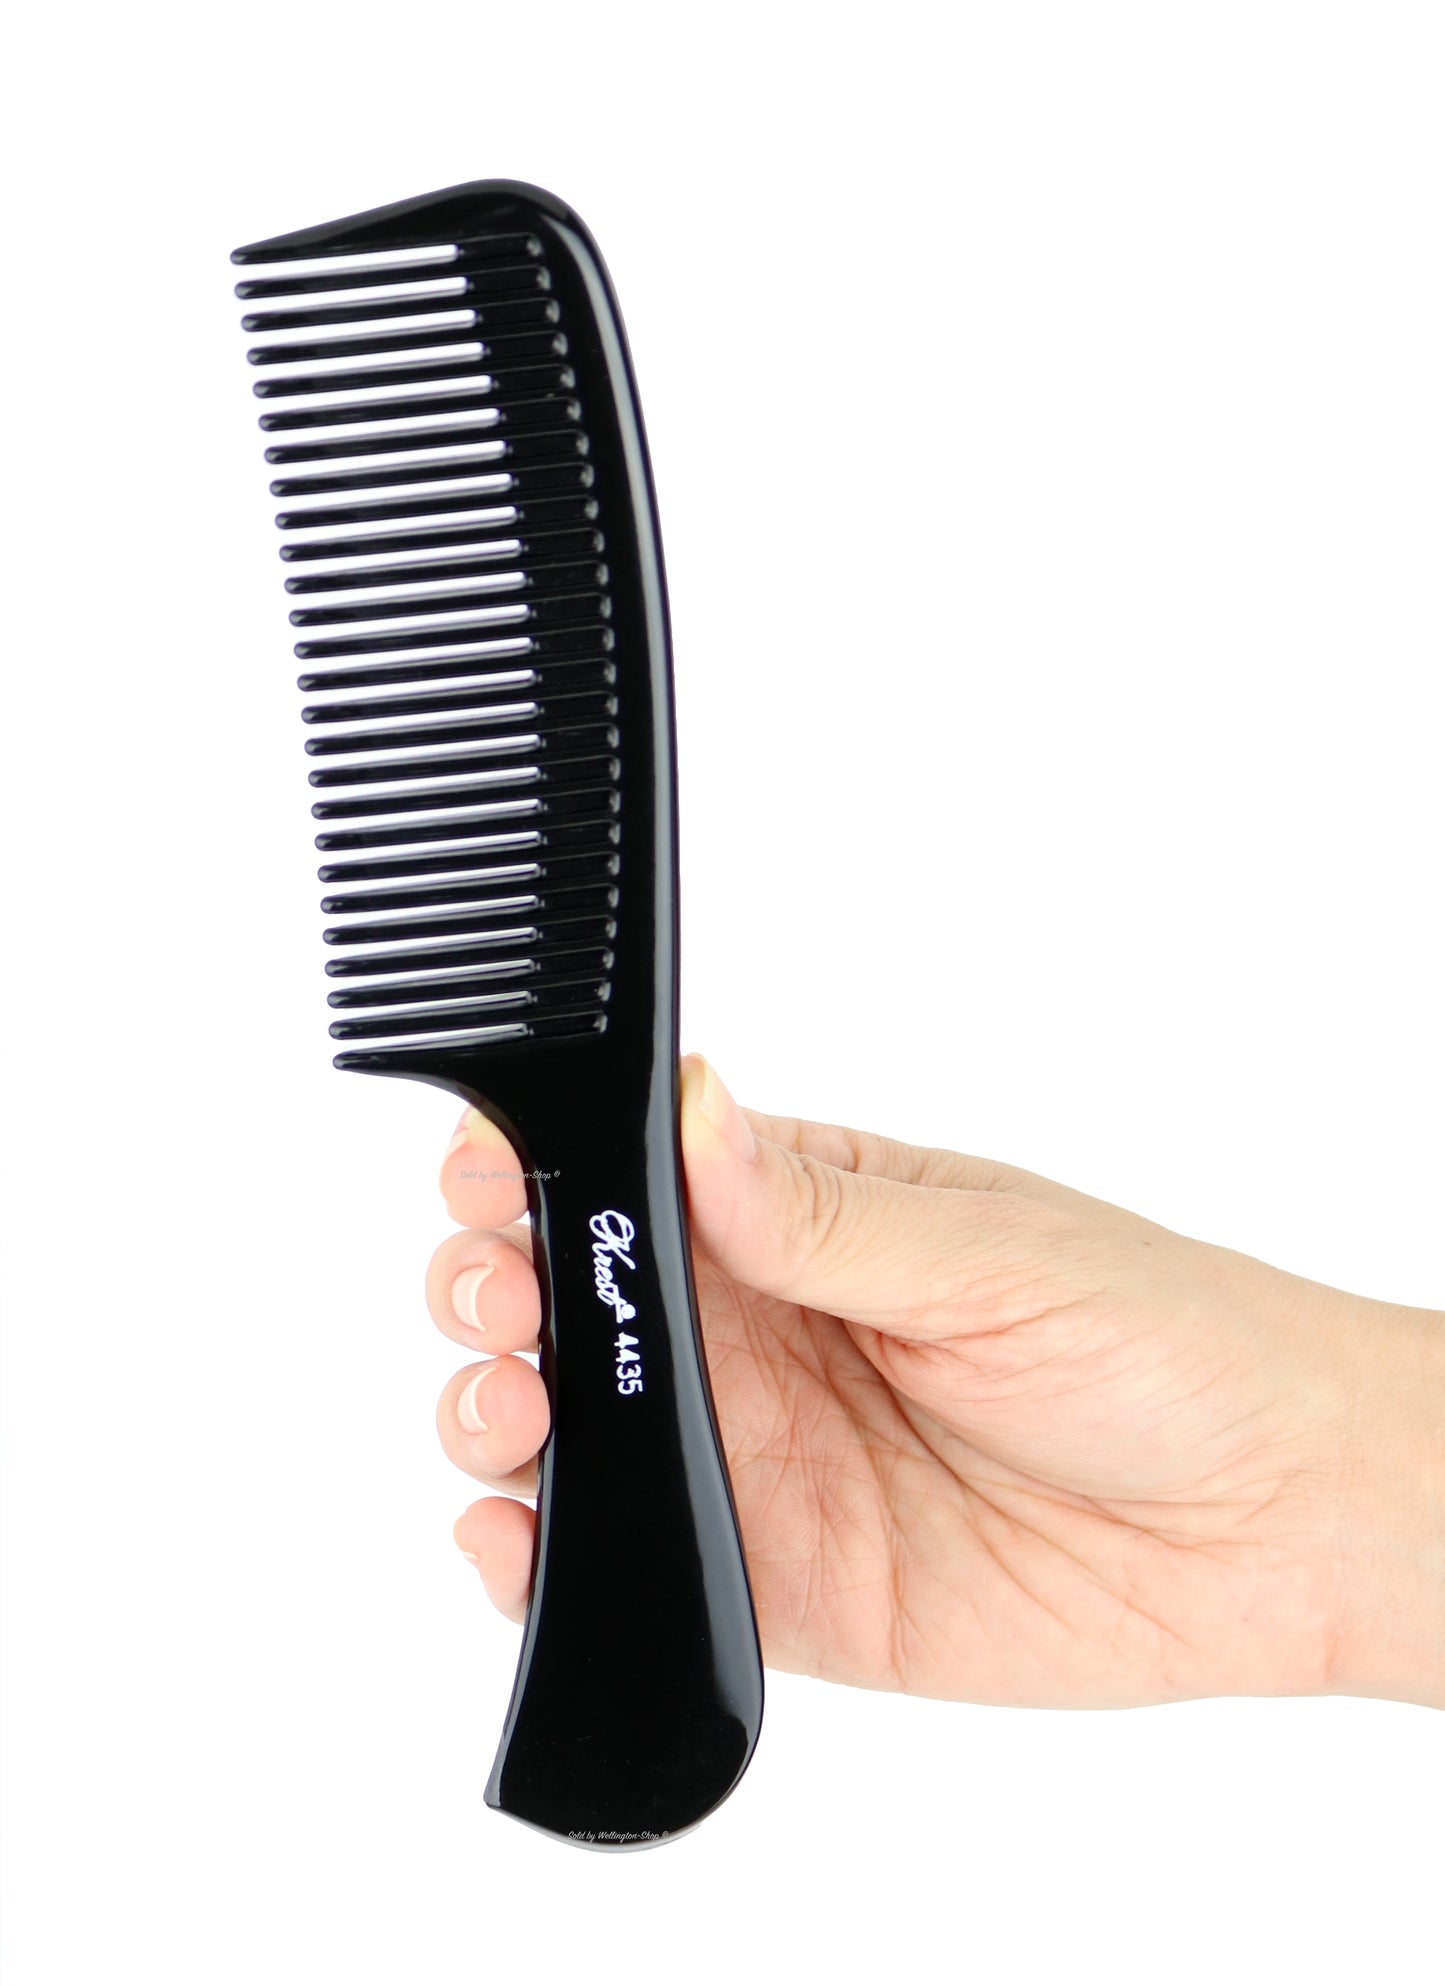 Krest Combs 9 In. Shampoo Hair Comb For Hair Cutting & Hair Styling Wet or dry 1 Pc.